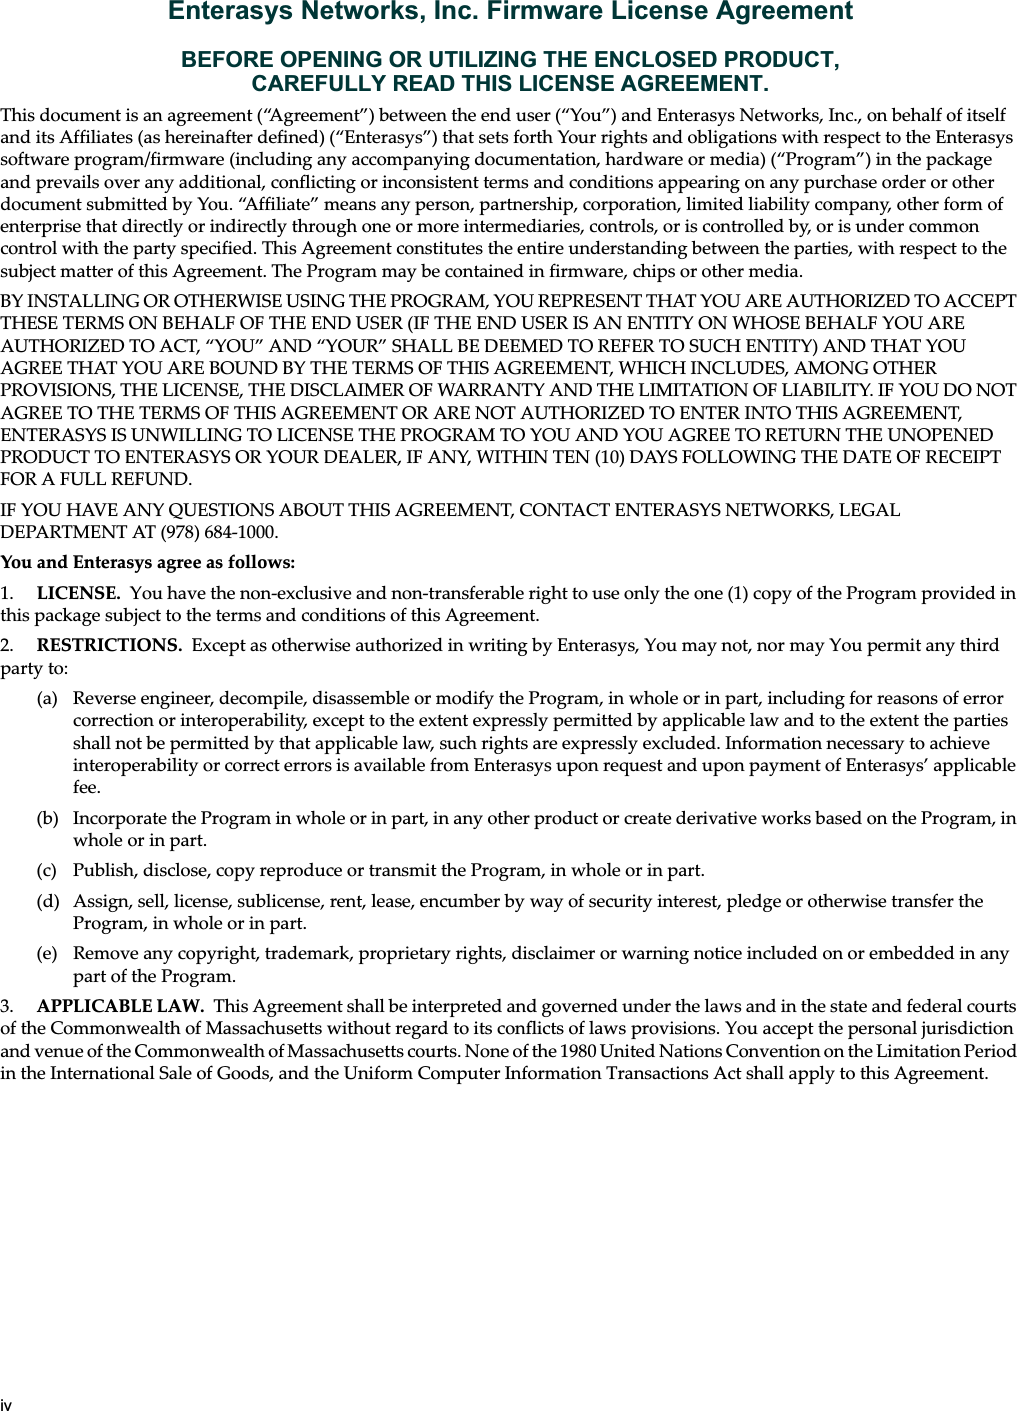 ivEnterasys Networks, Inc. Firmware License AgreementBEFORE OPENING OR UTILIZING THE ENCLOSED PRODUCT,CAREFULLY READ THIS LICENSE AGREEMENT.This document is an agreement (“Agreement”) between the end user (“You”) and Enterasys Networks, Inc., on behalf of itself and its Affiliates (as hereinafter defined) (“Enterasys”) that sets forth Your rights and obligations with respect to the Enterasys software program/firmware (including any accompanying documentation, hardware or media) (“Program”) in the package and prevails over any additional, conflicting or inconsistent terms and conditions appearing on any purchase order or other document submitted by You. “Affiliate” means any person, partnership, corporation, limited liability company, other form of enterprise that directly or indirectly through one or more intermediaries, controls, or is controlled by, or is under common control with the party specified. This Agreement constitutes the entire understanding between the parties, with respect to the subject matter of this Agreement. The Program may be contained in firmware, chips or other media.BY INSTALLING OR OTHERWISE USING THE PROGRAM, YOU REPRESENT THAT YOU ARE AUTHORIZED TO ACCEPT THESE TERMS ON BEHALF OF THE END USER (IF THE END USER IS AN ENTITY ON WHOSE BEHALF YOU ARE AUTHORIZED TO ACT, “YOU” AND “YOUR” SHALL BE DEEMED TO REFER TO SUCH ENTITY) AND THAT YOU AGREE THAT YOU ARE BOUND BY THE TERMS OF THIS AGREEMENT, WHICH INCLUDES, AMONG OTHER PROVISIONS, THE LICENSE, THE DISCLAIMER OF WARRANTY AND THE LIMITATION OF LIABILITY. IF YOU DO NOT AGREE TO THE TERMS OF THIS AGREEMENT OR ARE NOT AUTHORIZED TO ENTER INTO THIS AGREEMENT, ENTERASYS IS UNWILLING TO LICENSE THE PROGRAM TO YOU AND YOU AGREE TO RETURN THE UNOPENED PRODUCT TO ENTERASYS OR YOUR DEALER, IF ANY, WITHIN TEN (10) DAYS FOLLOWING THE DATE OF RECEIPT FOR A FULL REFUND.IF YOU HAVE ANY QUESTIONS ABOUT THIS AGREEMENT, CONTACT ENTERASYS NETWORKS, LEGAL DEPARTMENT AT (978) 684-1000.You and Enterasys agree as follows:1. LICENSE. You have the non-exclusive and non-transferable right to use only the one (1) copy of the Program provided in this package subject to the terms and conditions of this Agreement.2. RESTRICTIONS. Except as otherwise authorized in writing by Enterasys, You may not, nor may You permit any third party to:(a) Reverse engineer, decompile, disassemble or modify the Program, in whole or in part, including for reasons of error correction or interoperability, except to the extent expressly permitted by applicable law and to the extent the parties shall not be permitted by that applicable law, such rights are expressly excluded. Information necessary to achieve interoperability or correct errors is available from Enterasys upon request and upon payment of Enterasys’ applicable fee.(b) Incorporate the Program in whole or in part, in any other product or create derivative works based on the Program, in whole or in part.(c) Publish, disclose, copy reproduce or transmit the Program, in whole or in part.(d) Assign, sell, license, sublicense, rent, lease, encumber by way of security interest, pledge or otherwise transfer the Program, in whole or in part.(e) Remove any copyright, trademark, proprietary rights, disclaimer or warning notice included on or embedded in any part of the Program.3. APPLICABLE LAW. This Agreement shall be interpreted and governed under the laws and in the state and federal courts of the Commonwealth of Massachusetts without regard to its conflicts of laws provisions. You accept the personal jurisdiction and venue of the Commonwealth of Massachusetts courts. None of the 1980 United Nations Convention on the Limitation Period in the International Sale of Goods, and the Uniform Computer Information Transactions Act shall apply to this Agreement.Draft